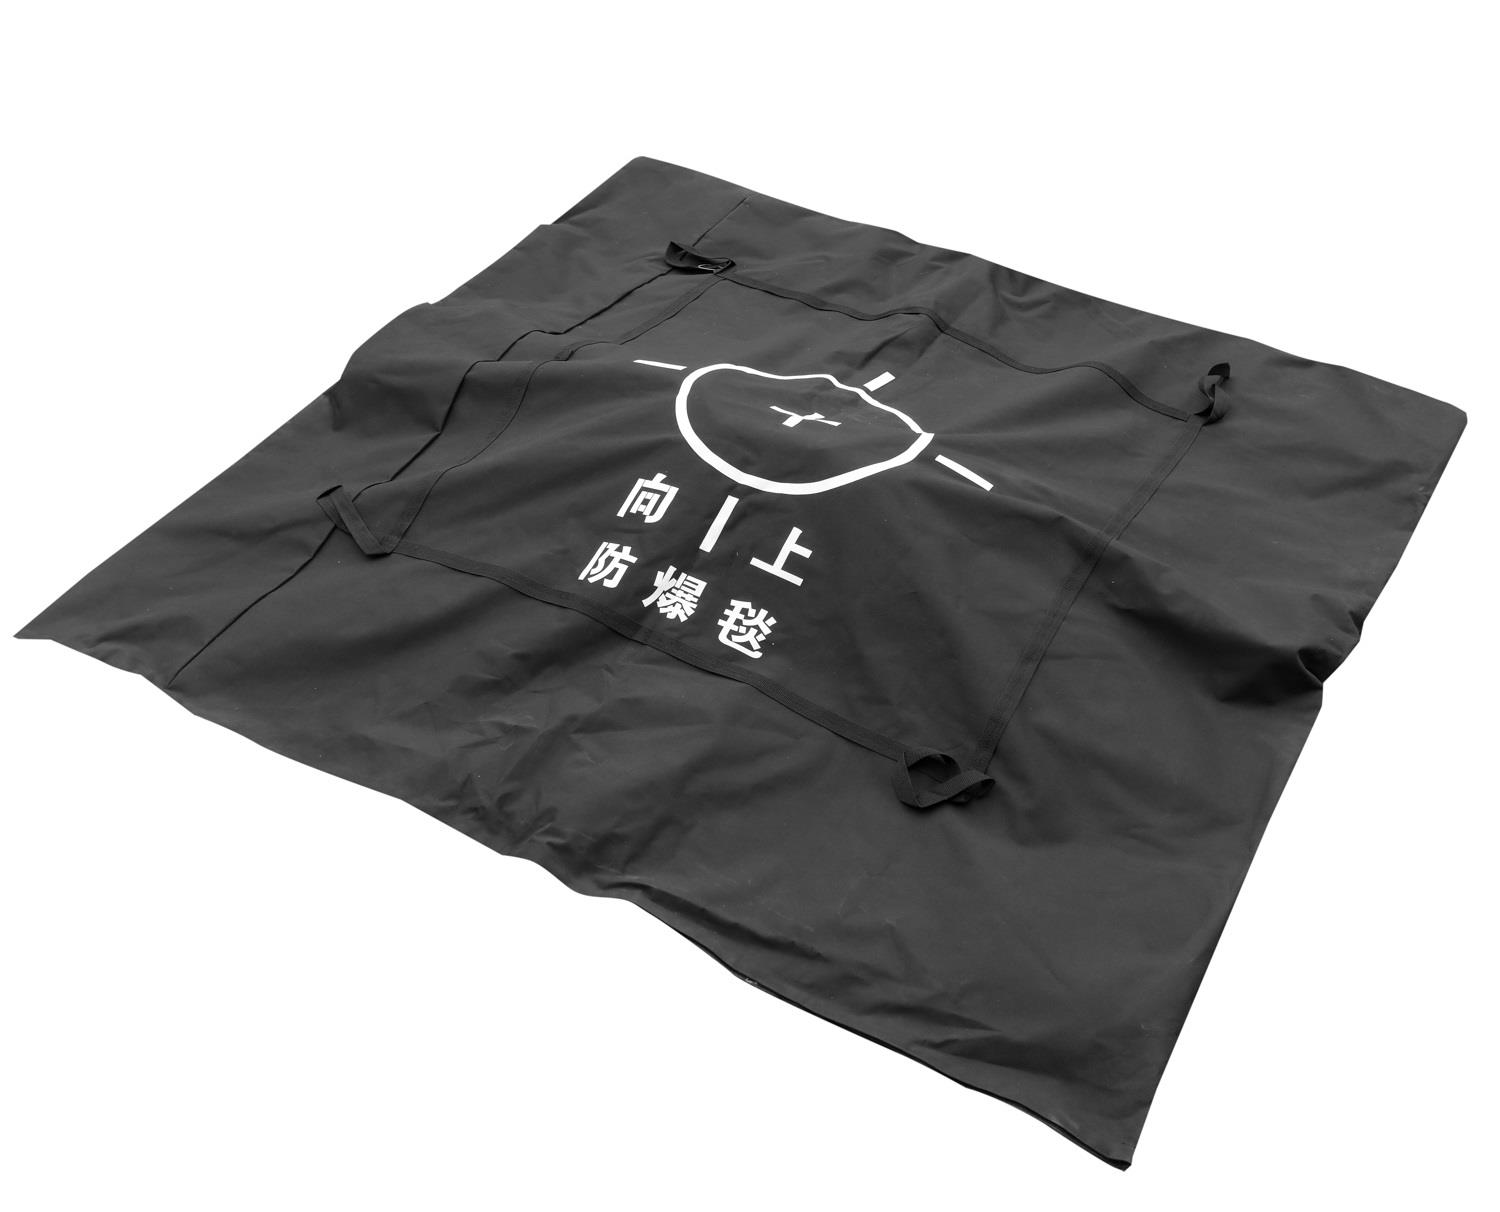 Explosion-proof Blanket_PROTECTION_同益中